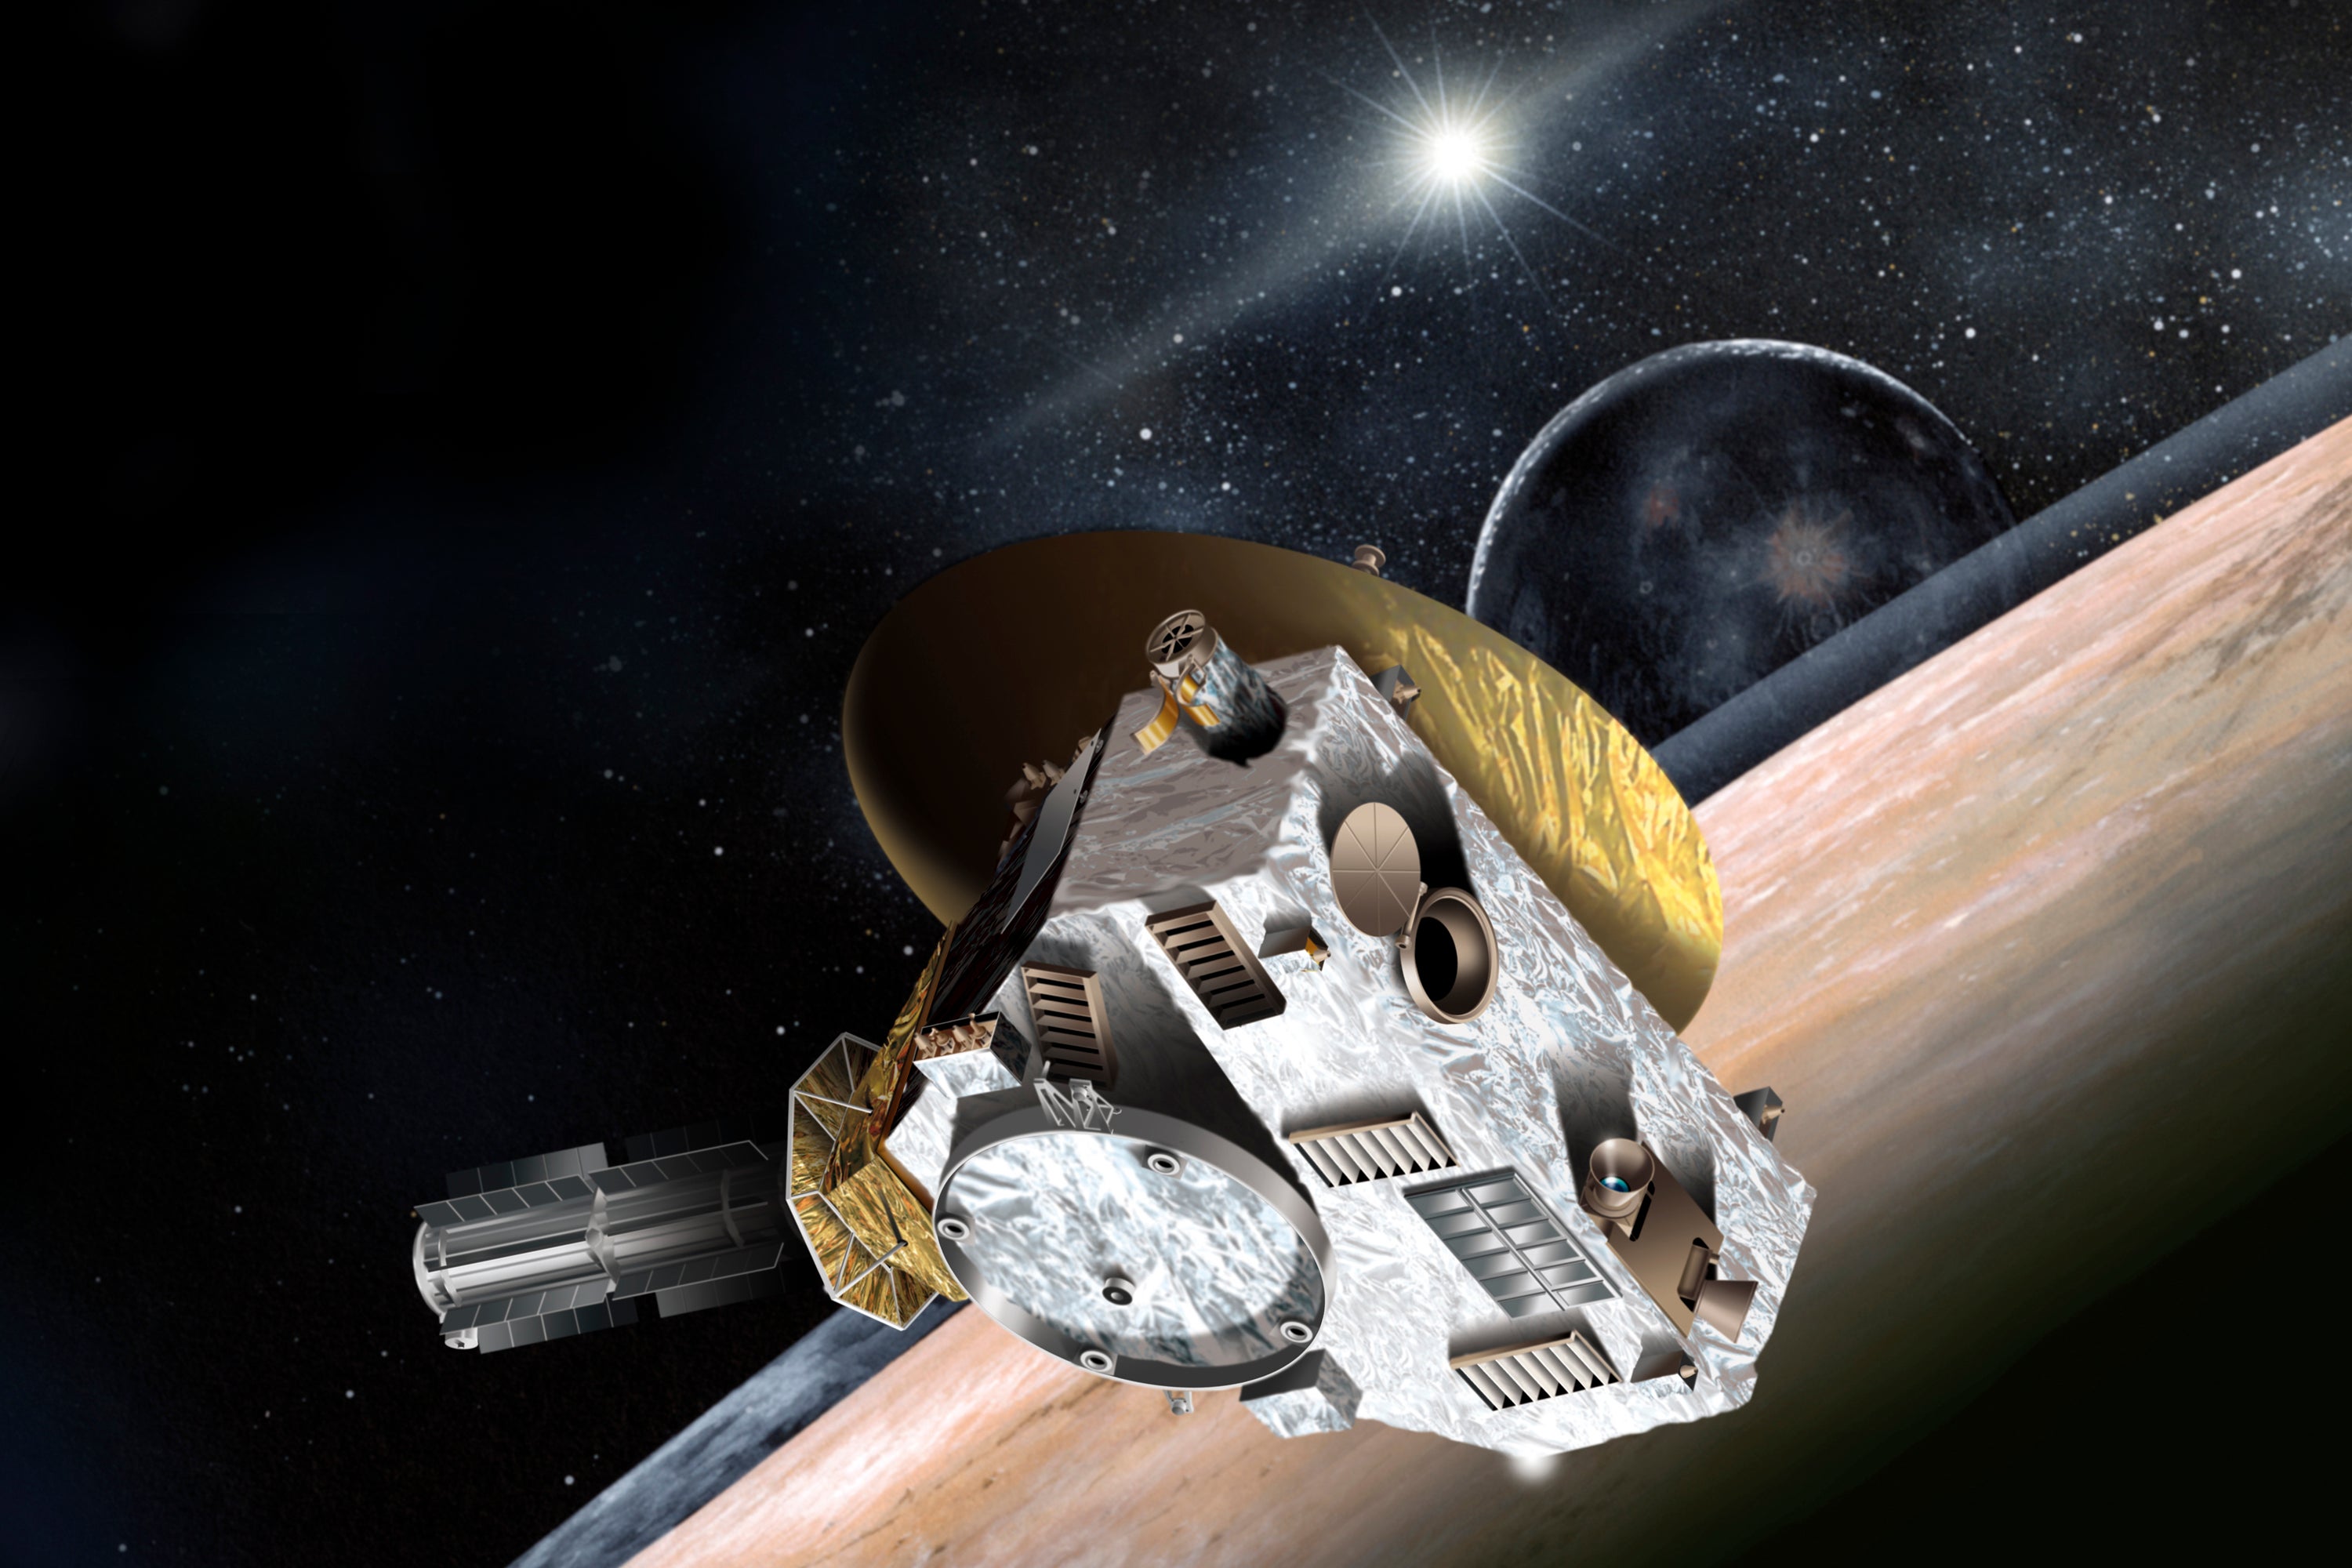 Kuiper Belt dust may be in our atmosphere and NASA labs